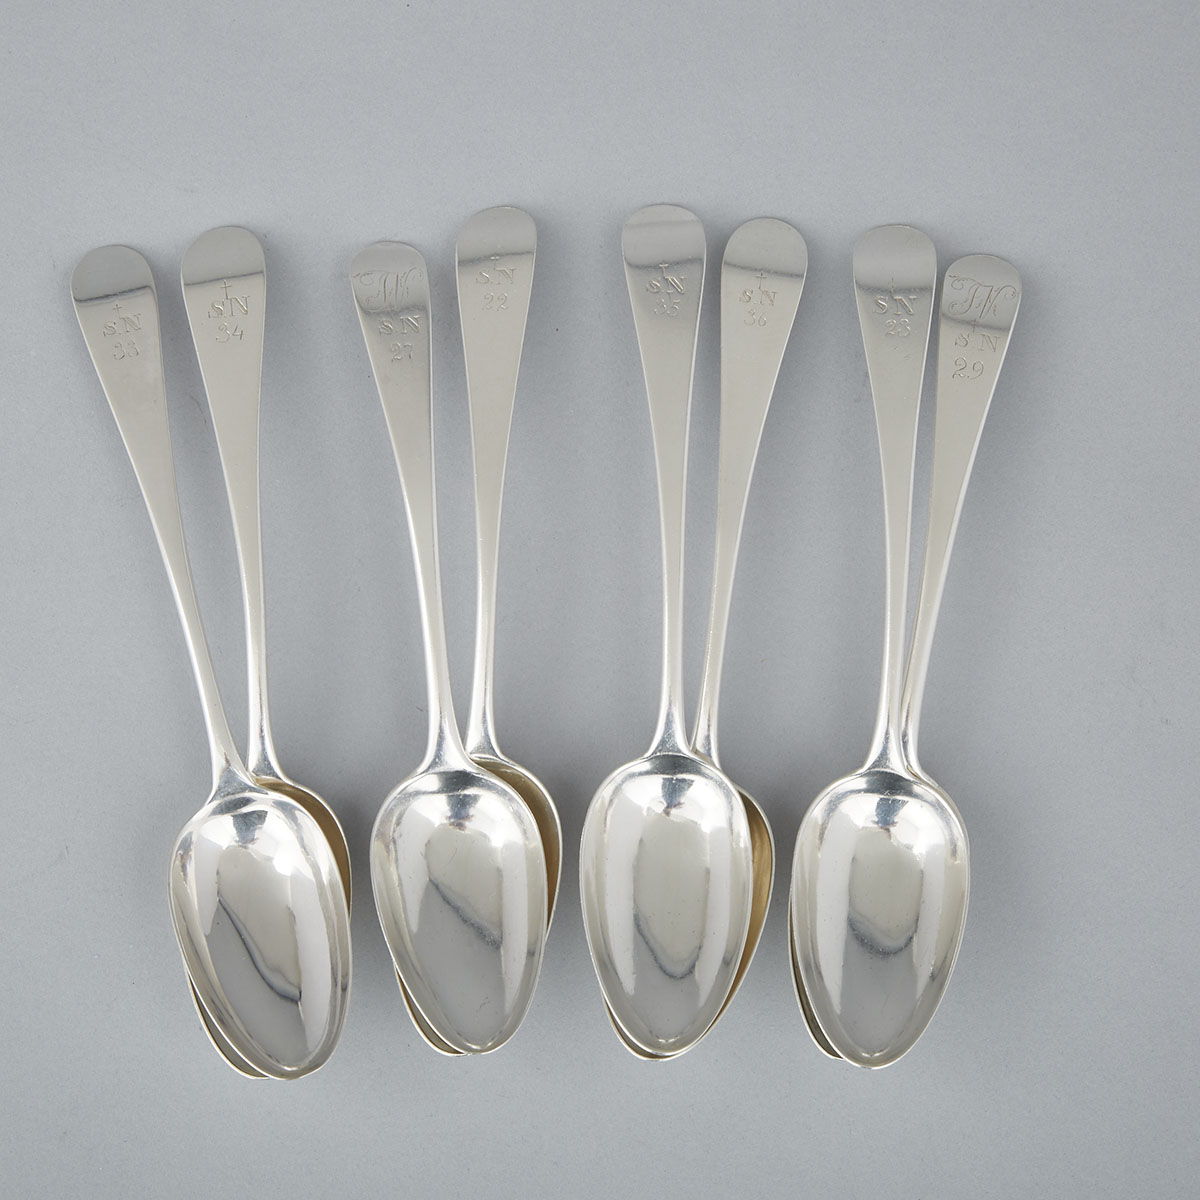 Eight Canadian Silver Old English Pattern Table Spoons, Laurent Amiot, Quebec City, Que., c.1800